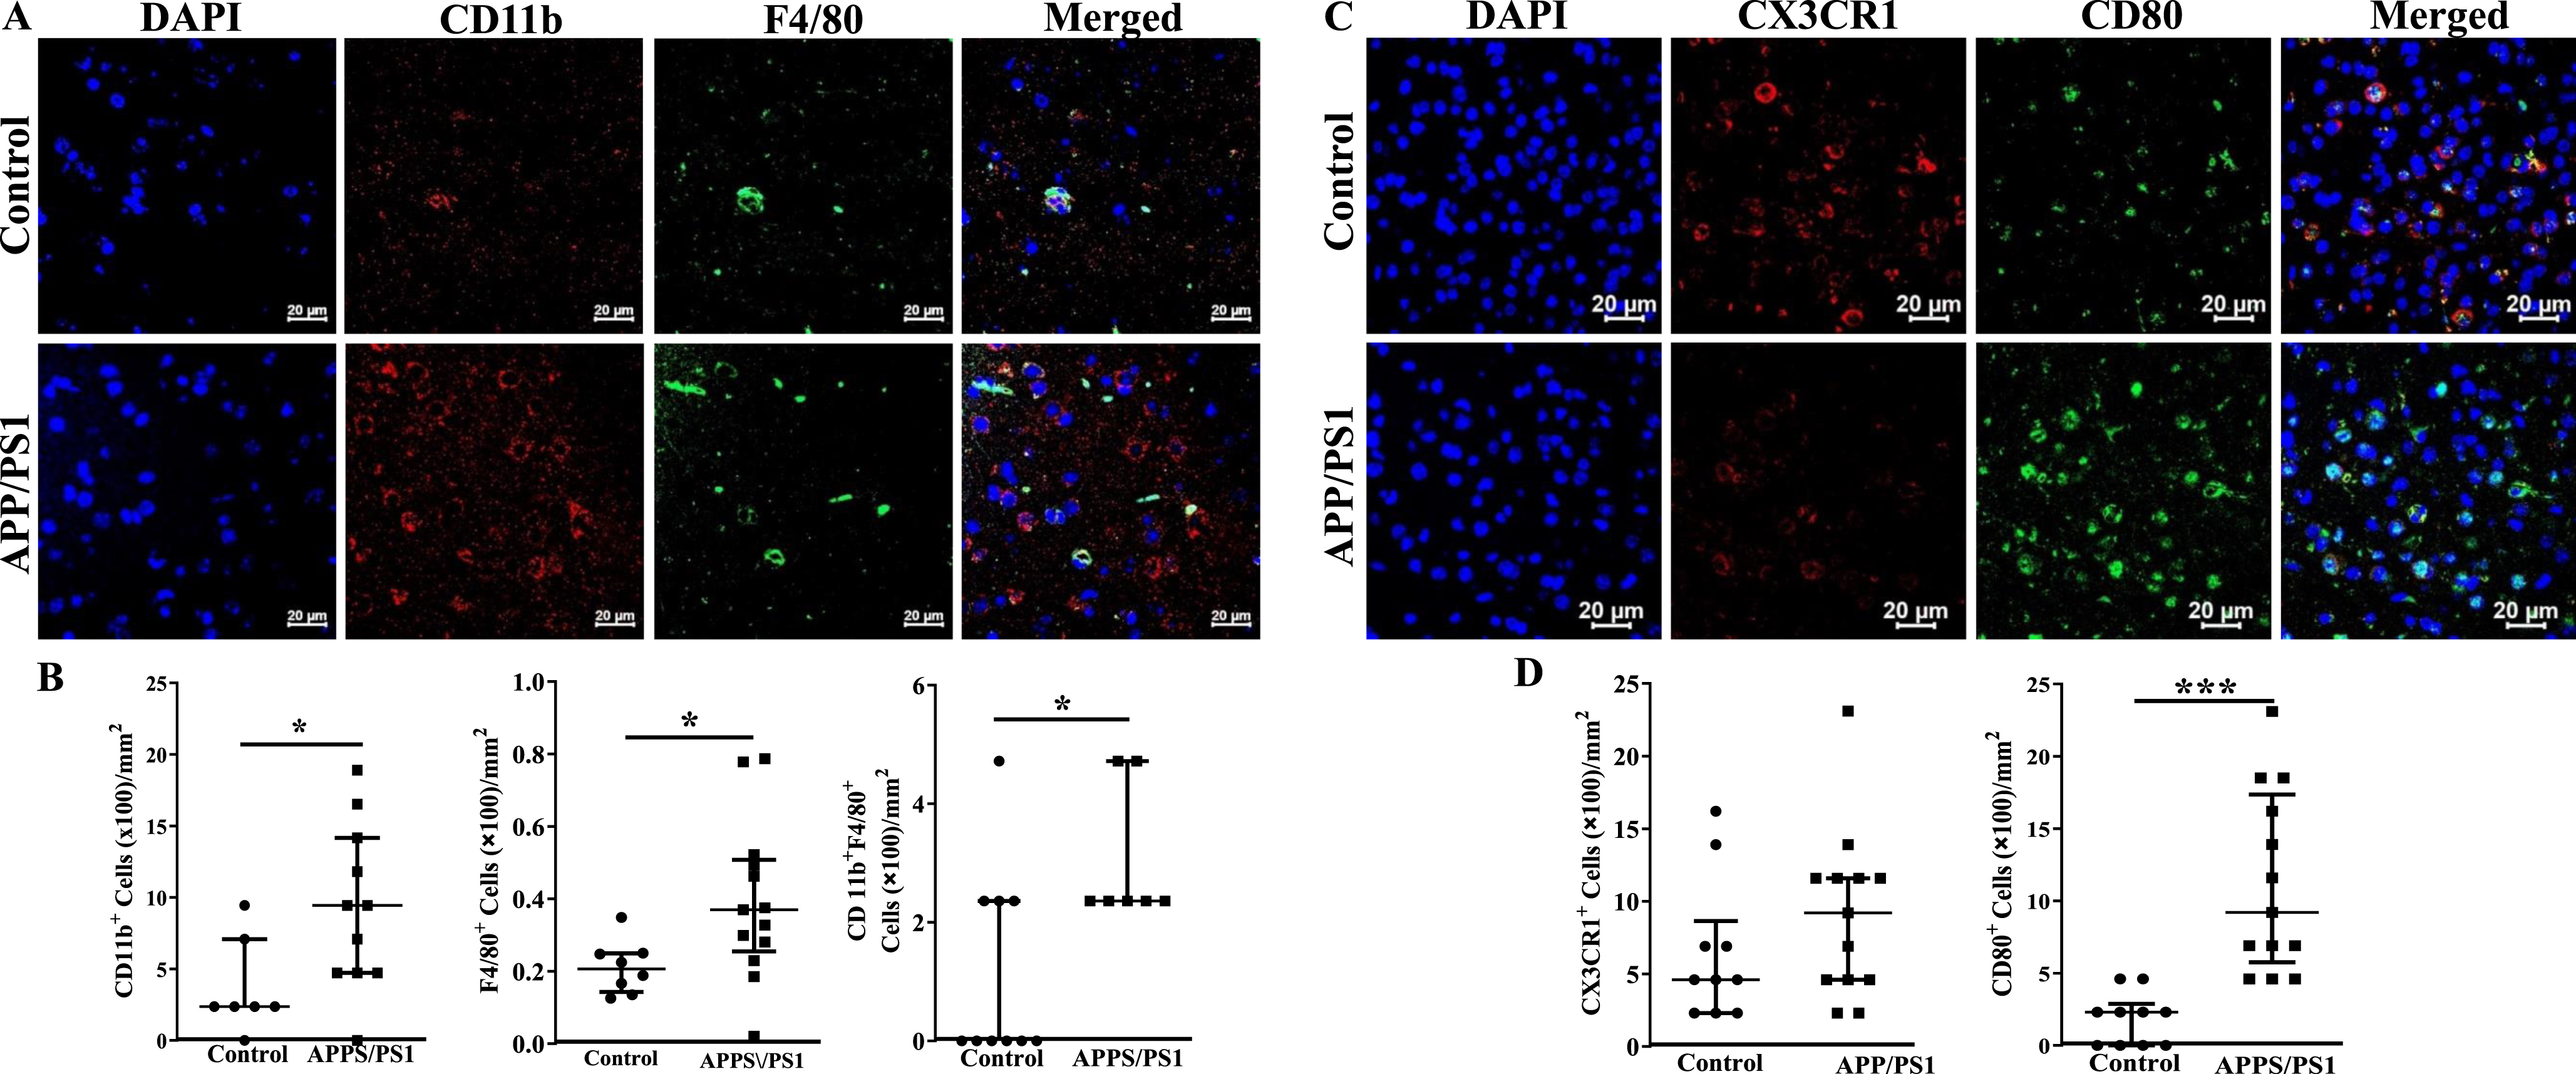 Increased number of inflammatory macrophage in the frontal cortices of APP/PS1 mice. A) Shown were representative immunofluorescence images of frontal cortices derived from control and APP/PS1 mice stained for nuclei (DAPI), CD11b or F4/80. Scale bar measures 20 microns. B) CD11b+ or F4/80+ or the dual positive cells were higher in the APP/PS1 mice (*p < 0.05, n = 6) compared to the control (n = 5). C) Shown were representative immunofluorescence images of frontal cortices derived from control and APP/PS1 mice stained for nuclei (DAPI), CX3CR1 or CD80. Scale bar measures 20 microns. D) CD80+ cells were higher in the APP/PS1 mice (*p < 0.001, n = 6) compared to the control (n = 5), while the number of CX3CR1+ cells was similar in both groups. Datasets were compared by Mann-Whitney test for statistical significance.